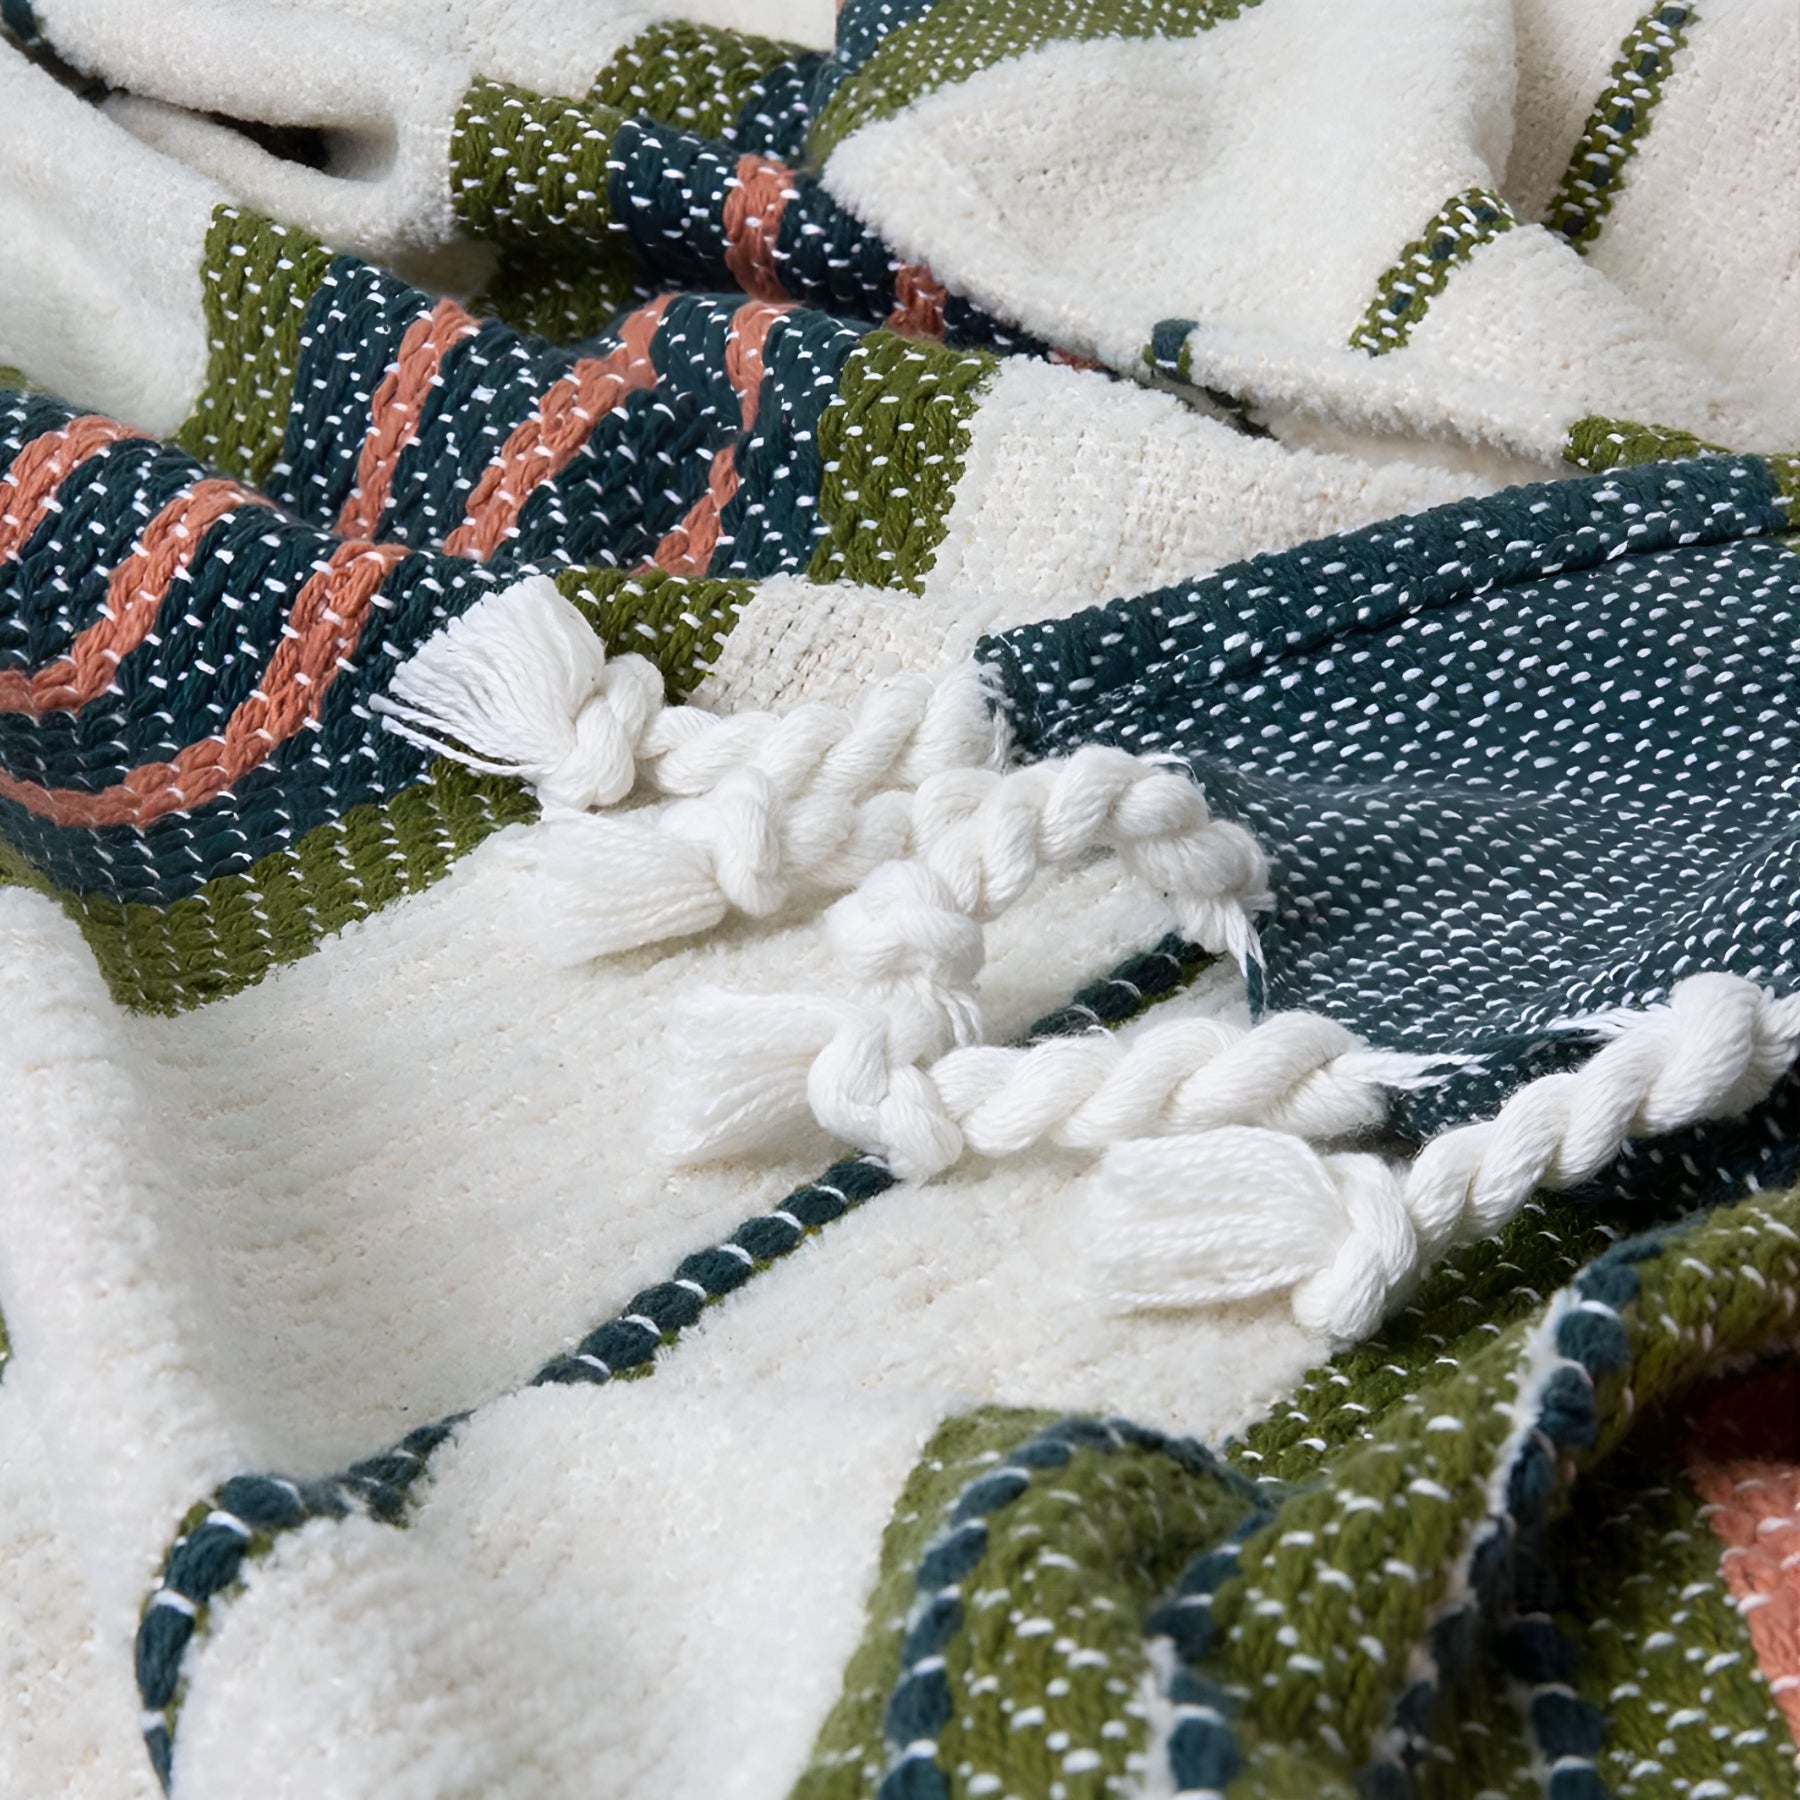 Close-up of the woven texture and tassel detail of the Zephyr throw blanket in green hues.